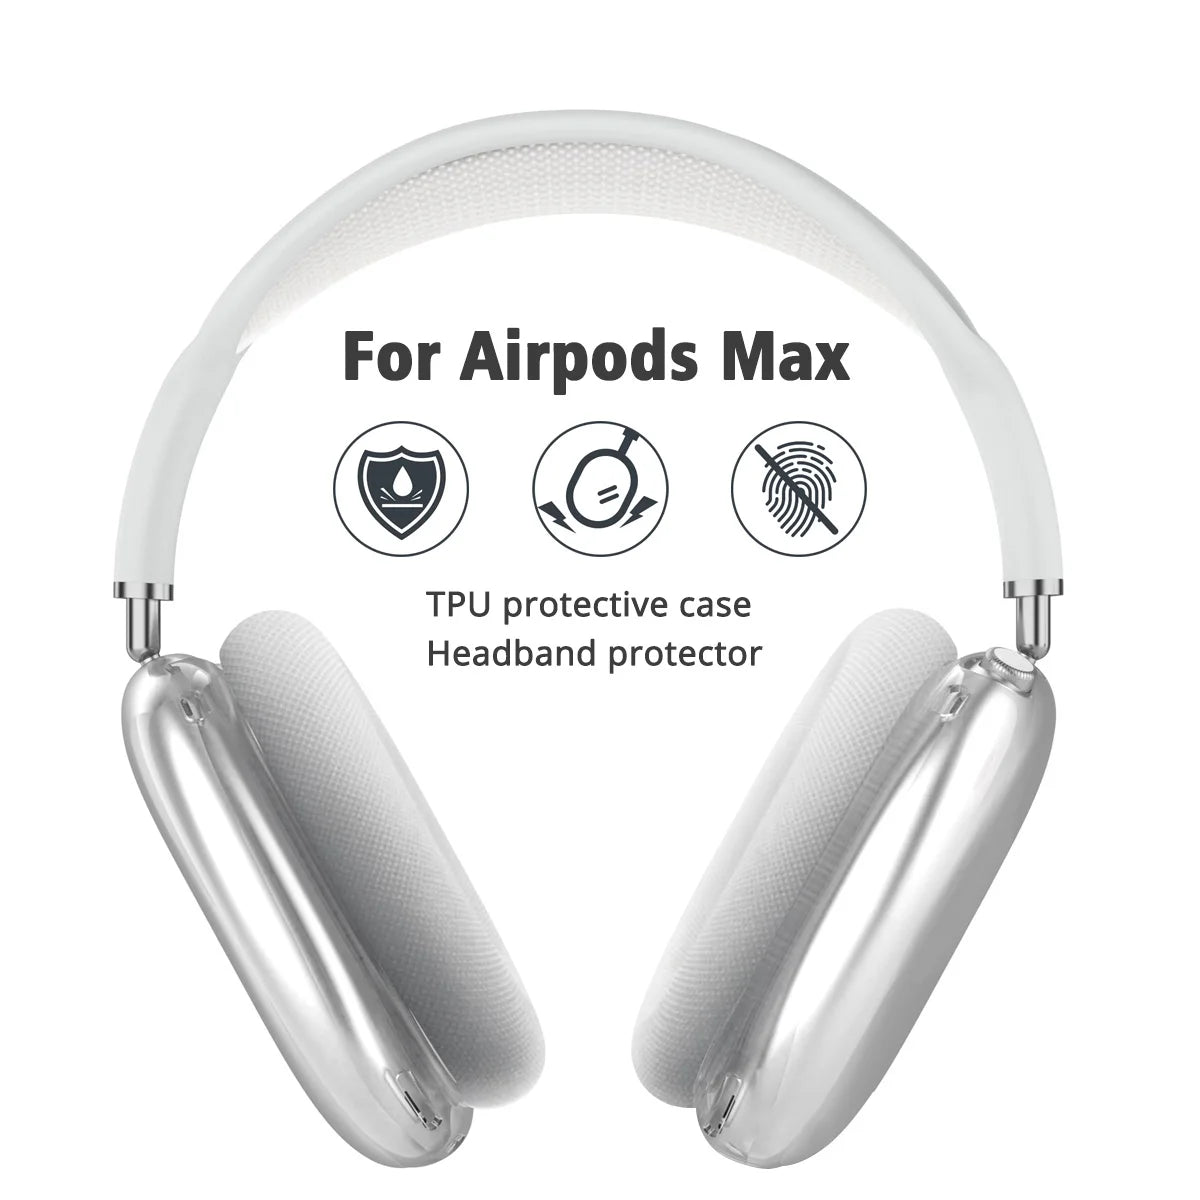 Clear Case For AirPods Max Transparent Cover Soft TPU Anti-Scratch Sleeve Protective Cases For Apple AirPods Max Headphone Accessories